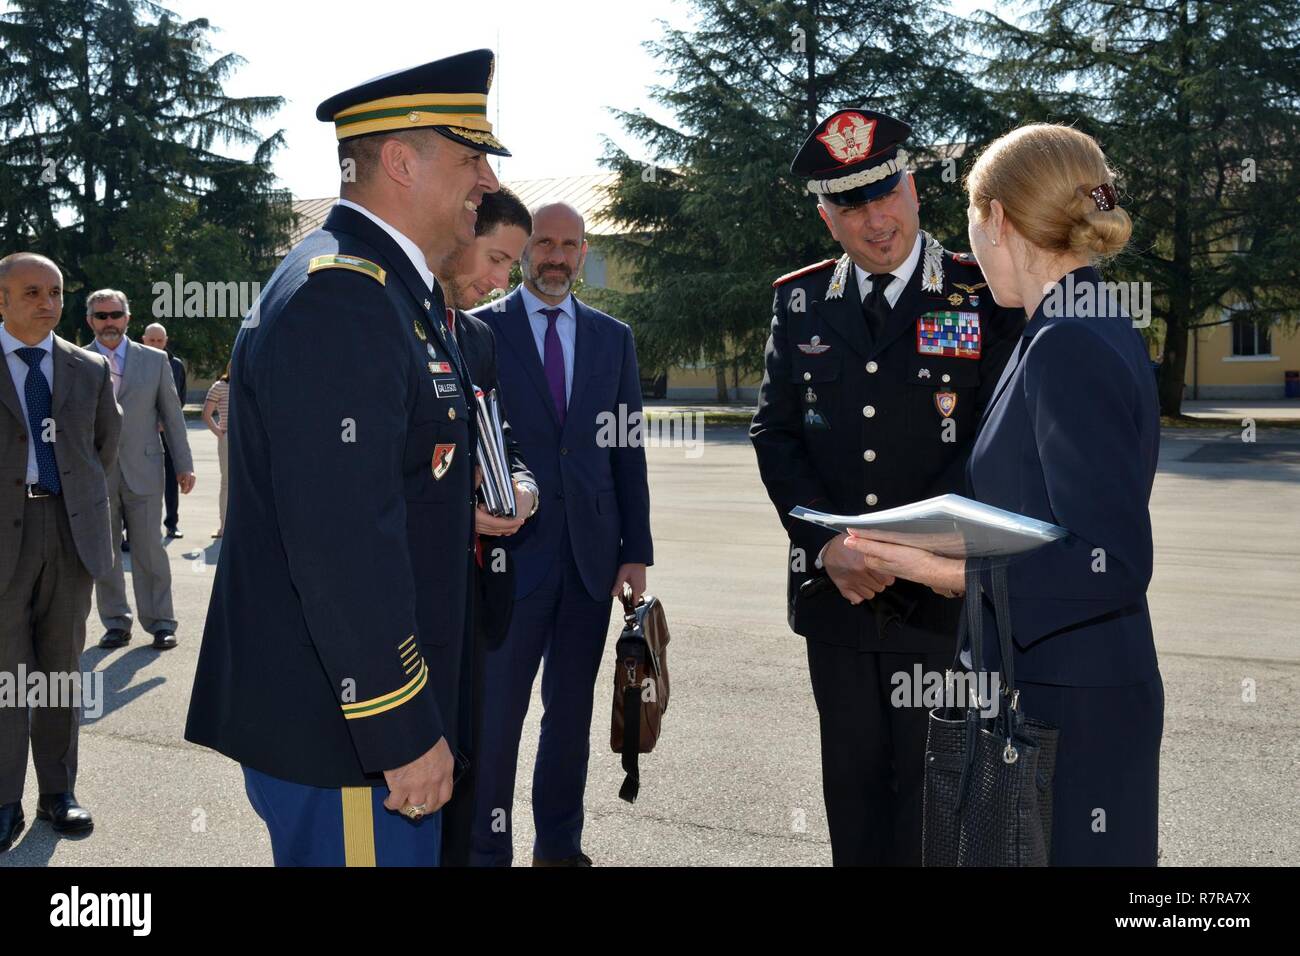 Brig. Gen. Giovanni Pietro Barbano, Center of Excellence for Stability Police Units (CoESPU) director (center) and U.S. Army Col. Darius S. Gallegos, CoESPU deputy director (left), salute Ms. Kelly Degnan, Charge’ d’Affaires ad interim U.S. Embassy & Consulates Italy,  during visit at Center of Excellence for Stability Police Units (CoESPU) Vicenza, Italy, Mar. 30, 2017. Stock Photo